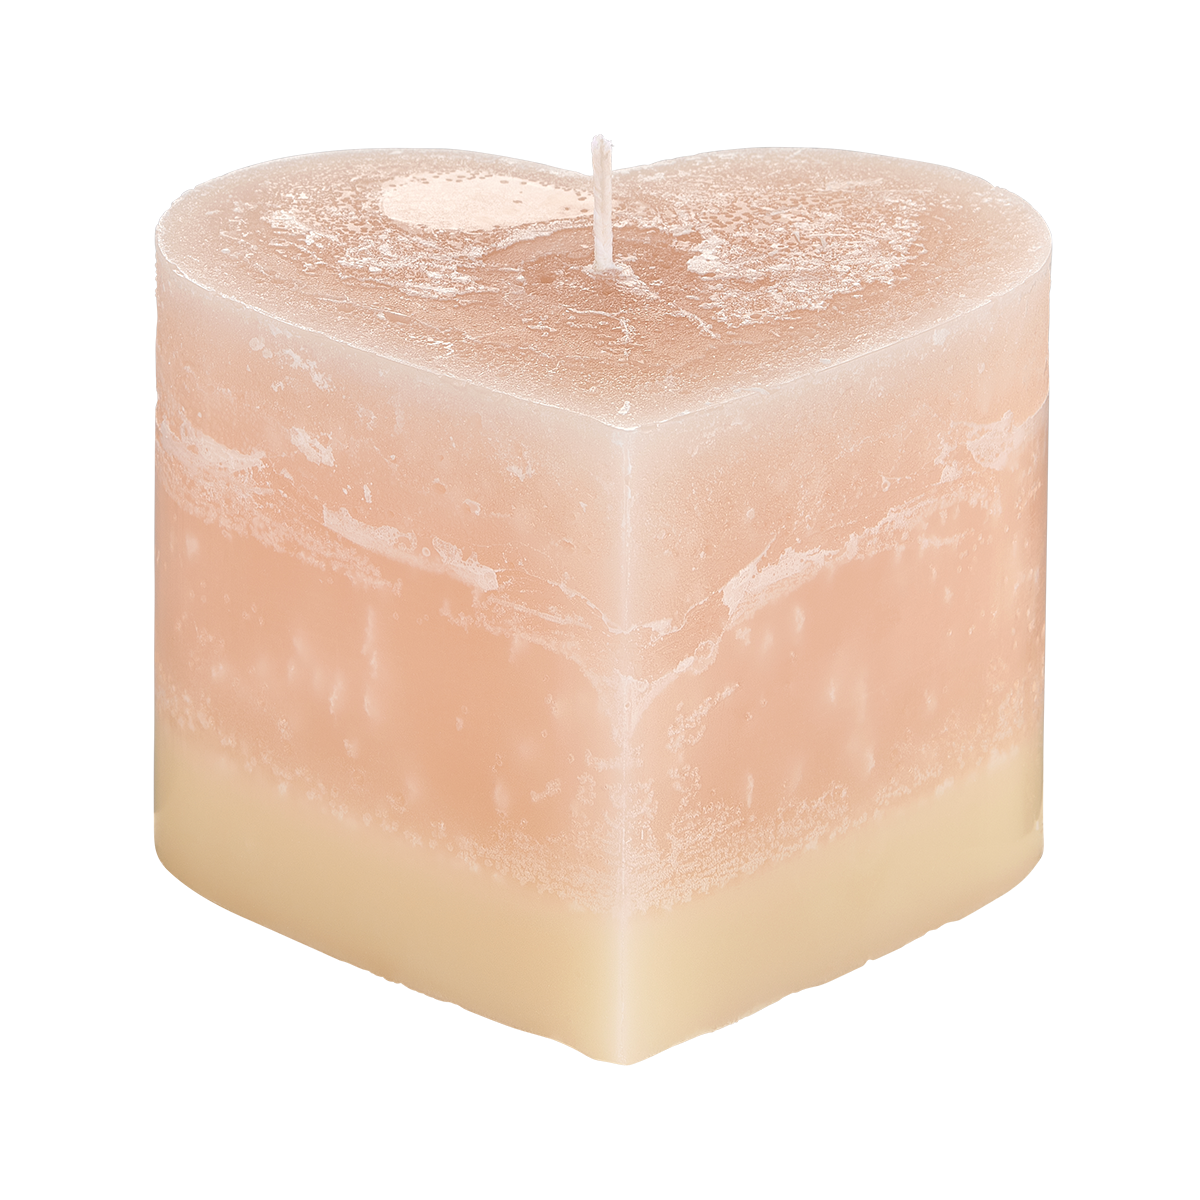 0003_1_wick_candle_heart_candle_blonde_tobacco___honney_148.psd.png